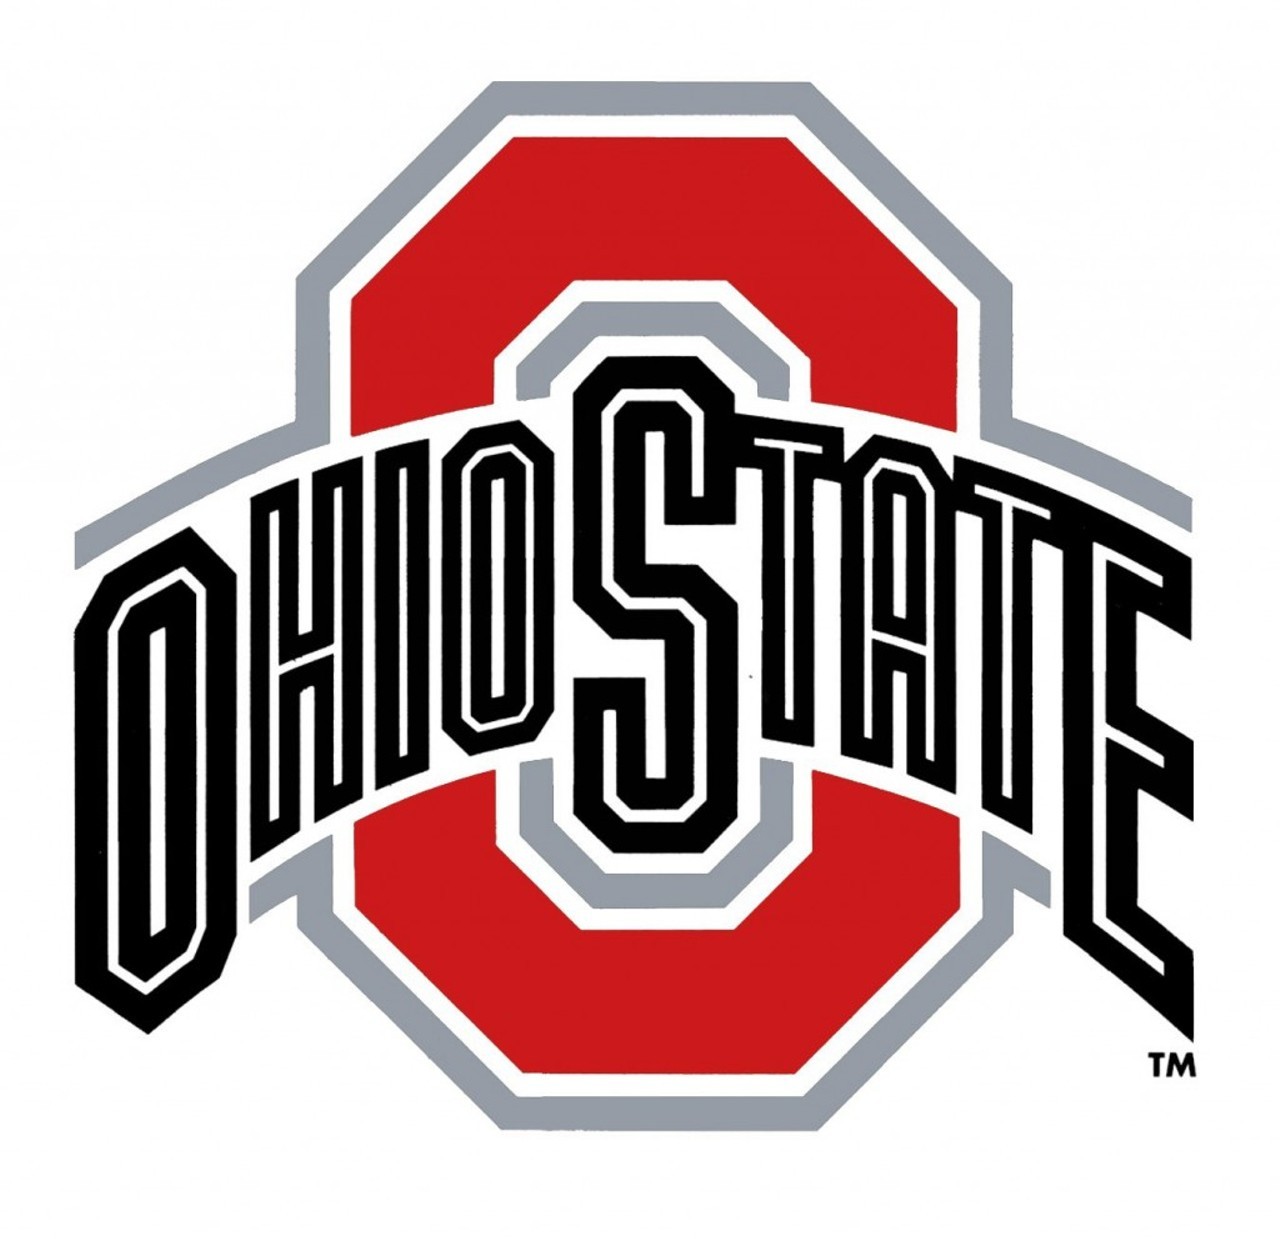 OSU vs. Michigan Watch Party 
When: Sat., Nov. 26, 11 a.m.-5 p.m. 
Email: ContactUs@ClevelandRovers.com 
Price: $40 @ the door // $35 in advance 
https://www.facebook.com/events/1624721254220877
One of the year's biggest college football rivalries features the Ohio State University going up against the University of Michigan. This year's game promise to be particularly good as each team is highly ranked. The watch party that takes place from 11 a.m. to 5 p.m. today at PJ McIntyre's has reportedly been voted one of the best OSU vs. Michigan watch parties in Cleveland. Tickets are $40 at the door or $35 in advance. The ticket price includes fire roasted pork, chargrilled chicken, picnic style sides and all you can (responsibly) drink draft beer.